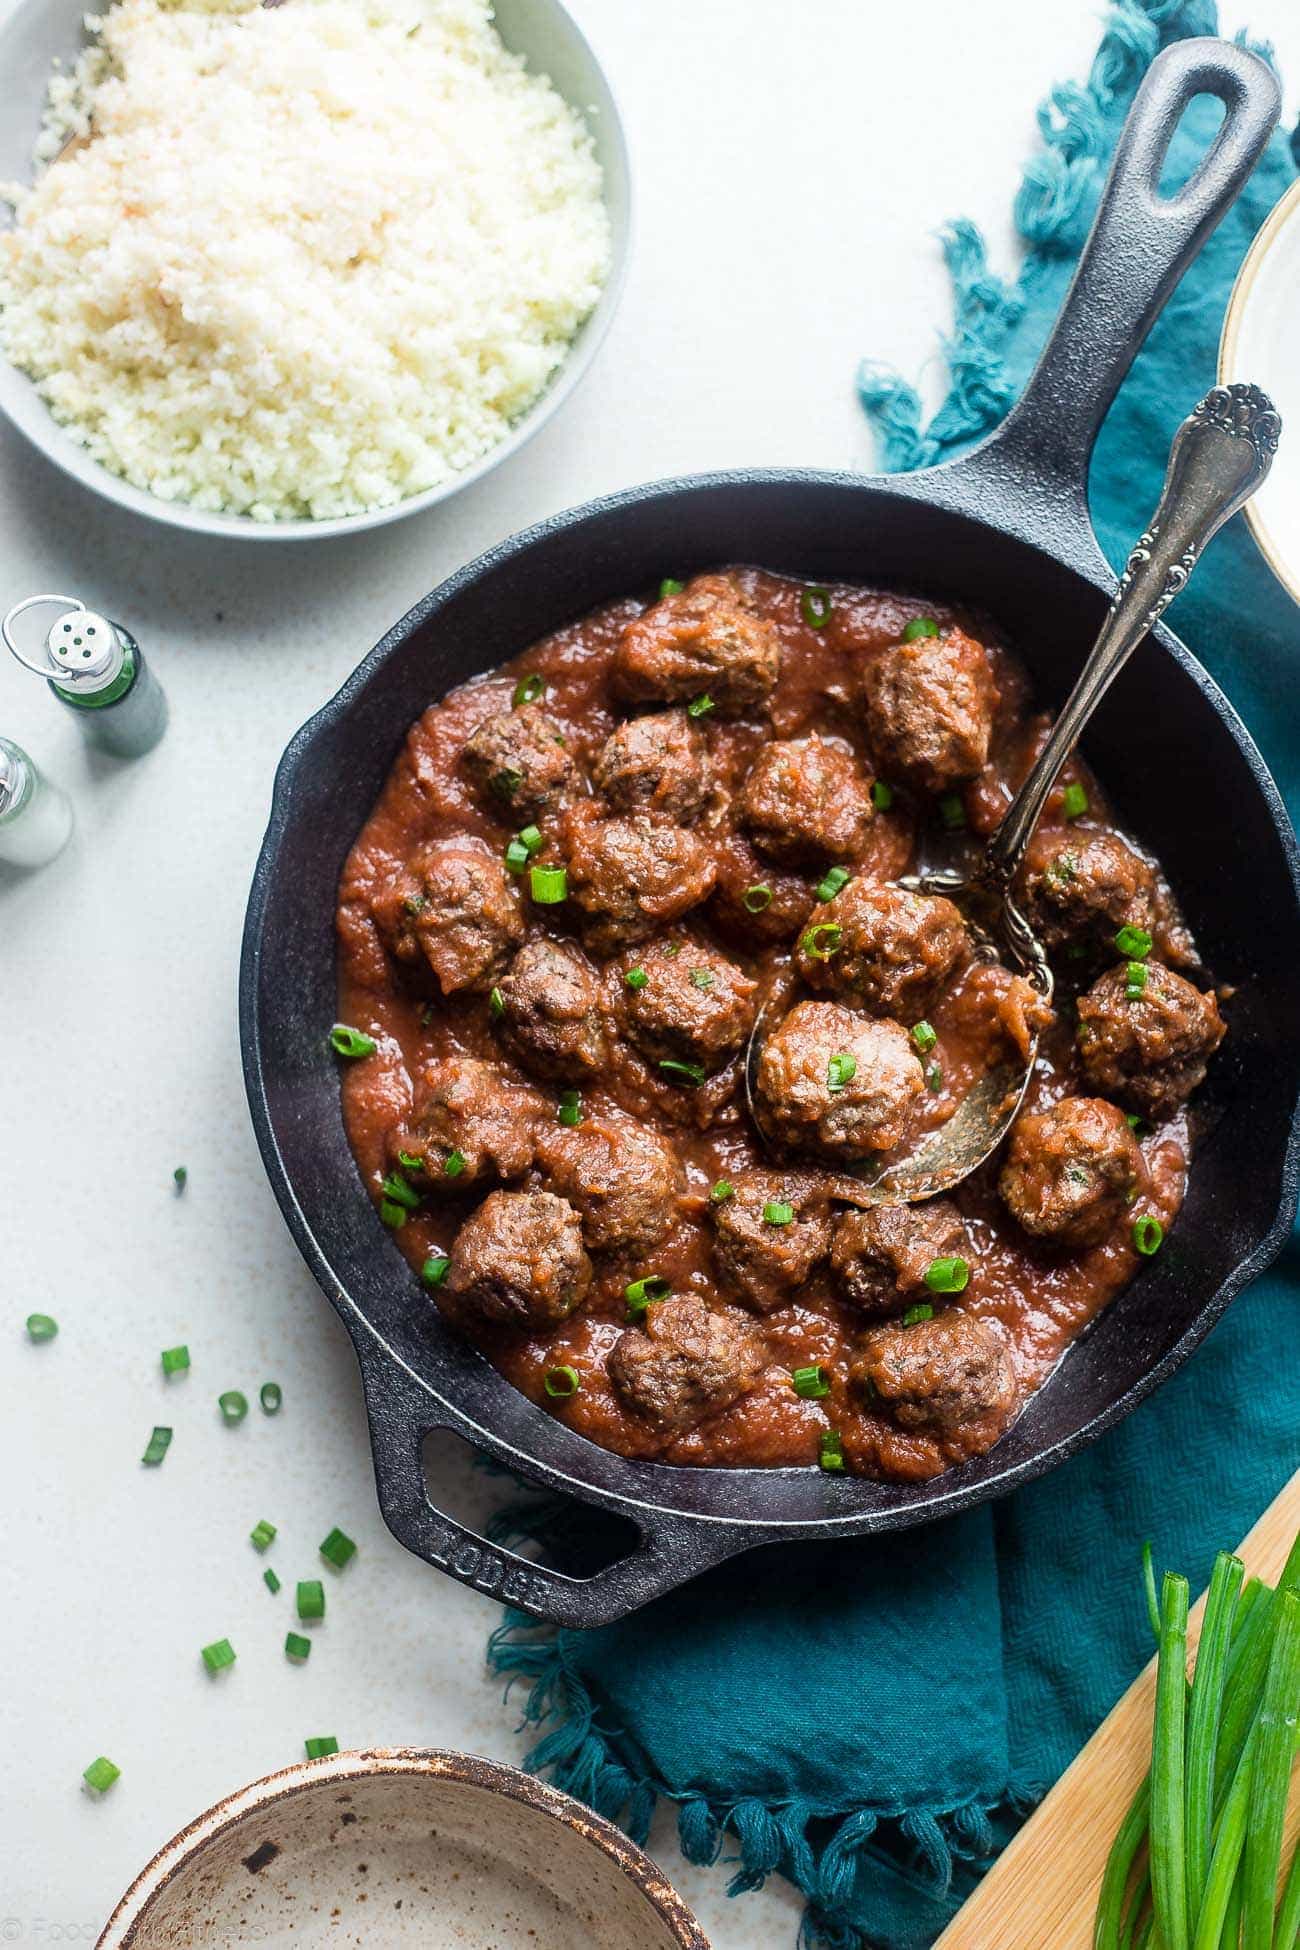 Whole30 Sweet and Sour Paleo Meatballs - These easy paleo meatballs are a healthy remake of a classic recipe that is gluten free and whole30 complaint! They're a weeknight meal that everyone will love! | Foodfaithfitness.com | @FoodFaithFit